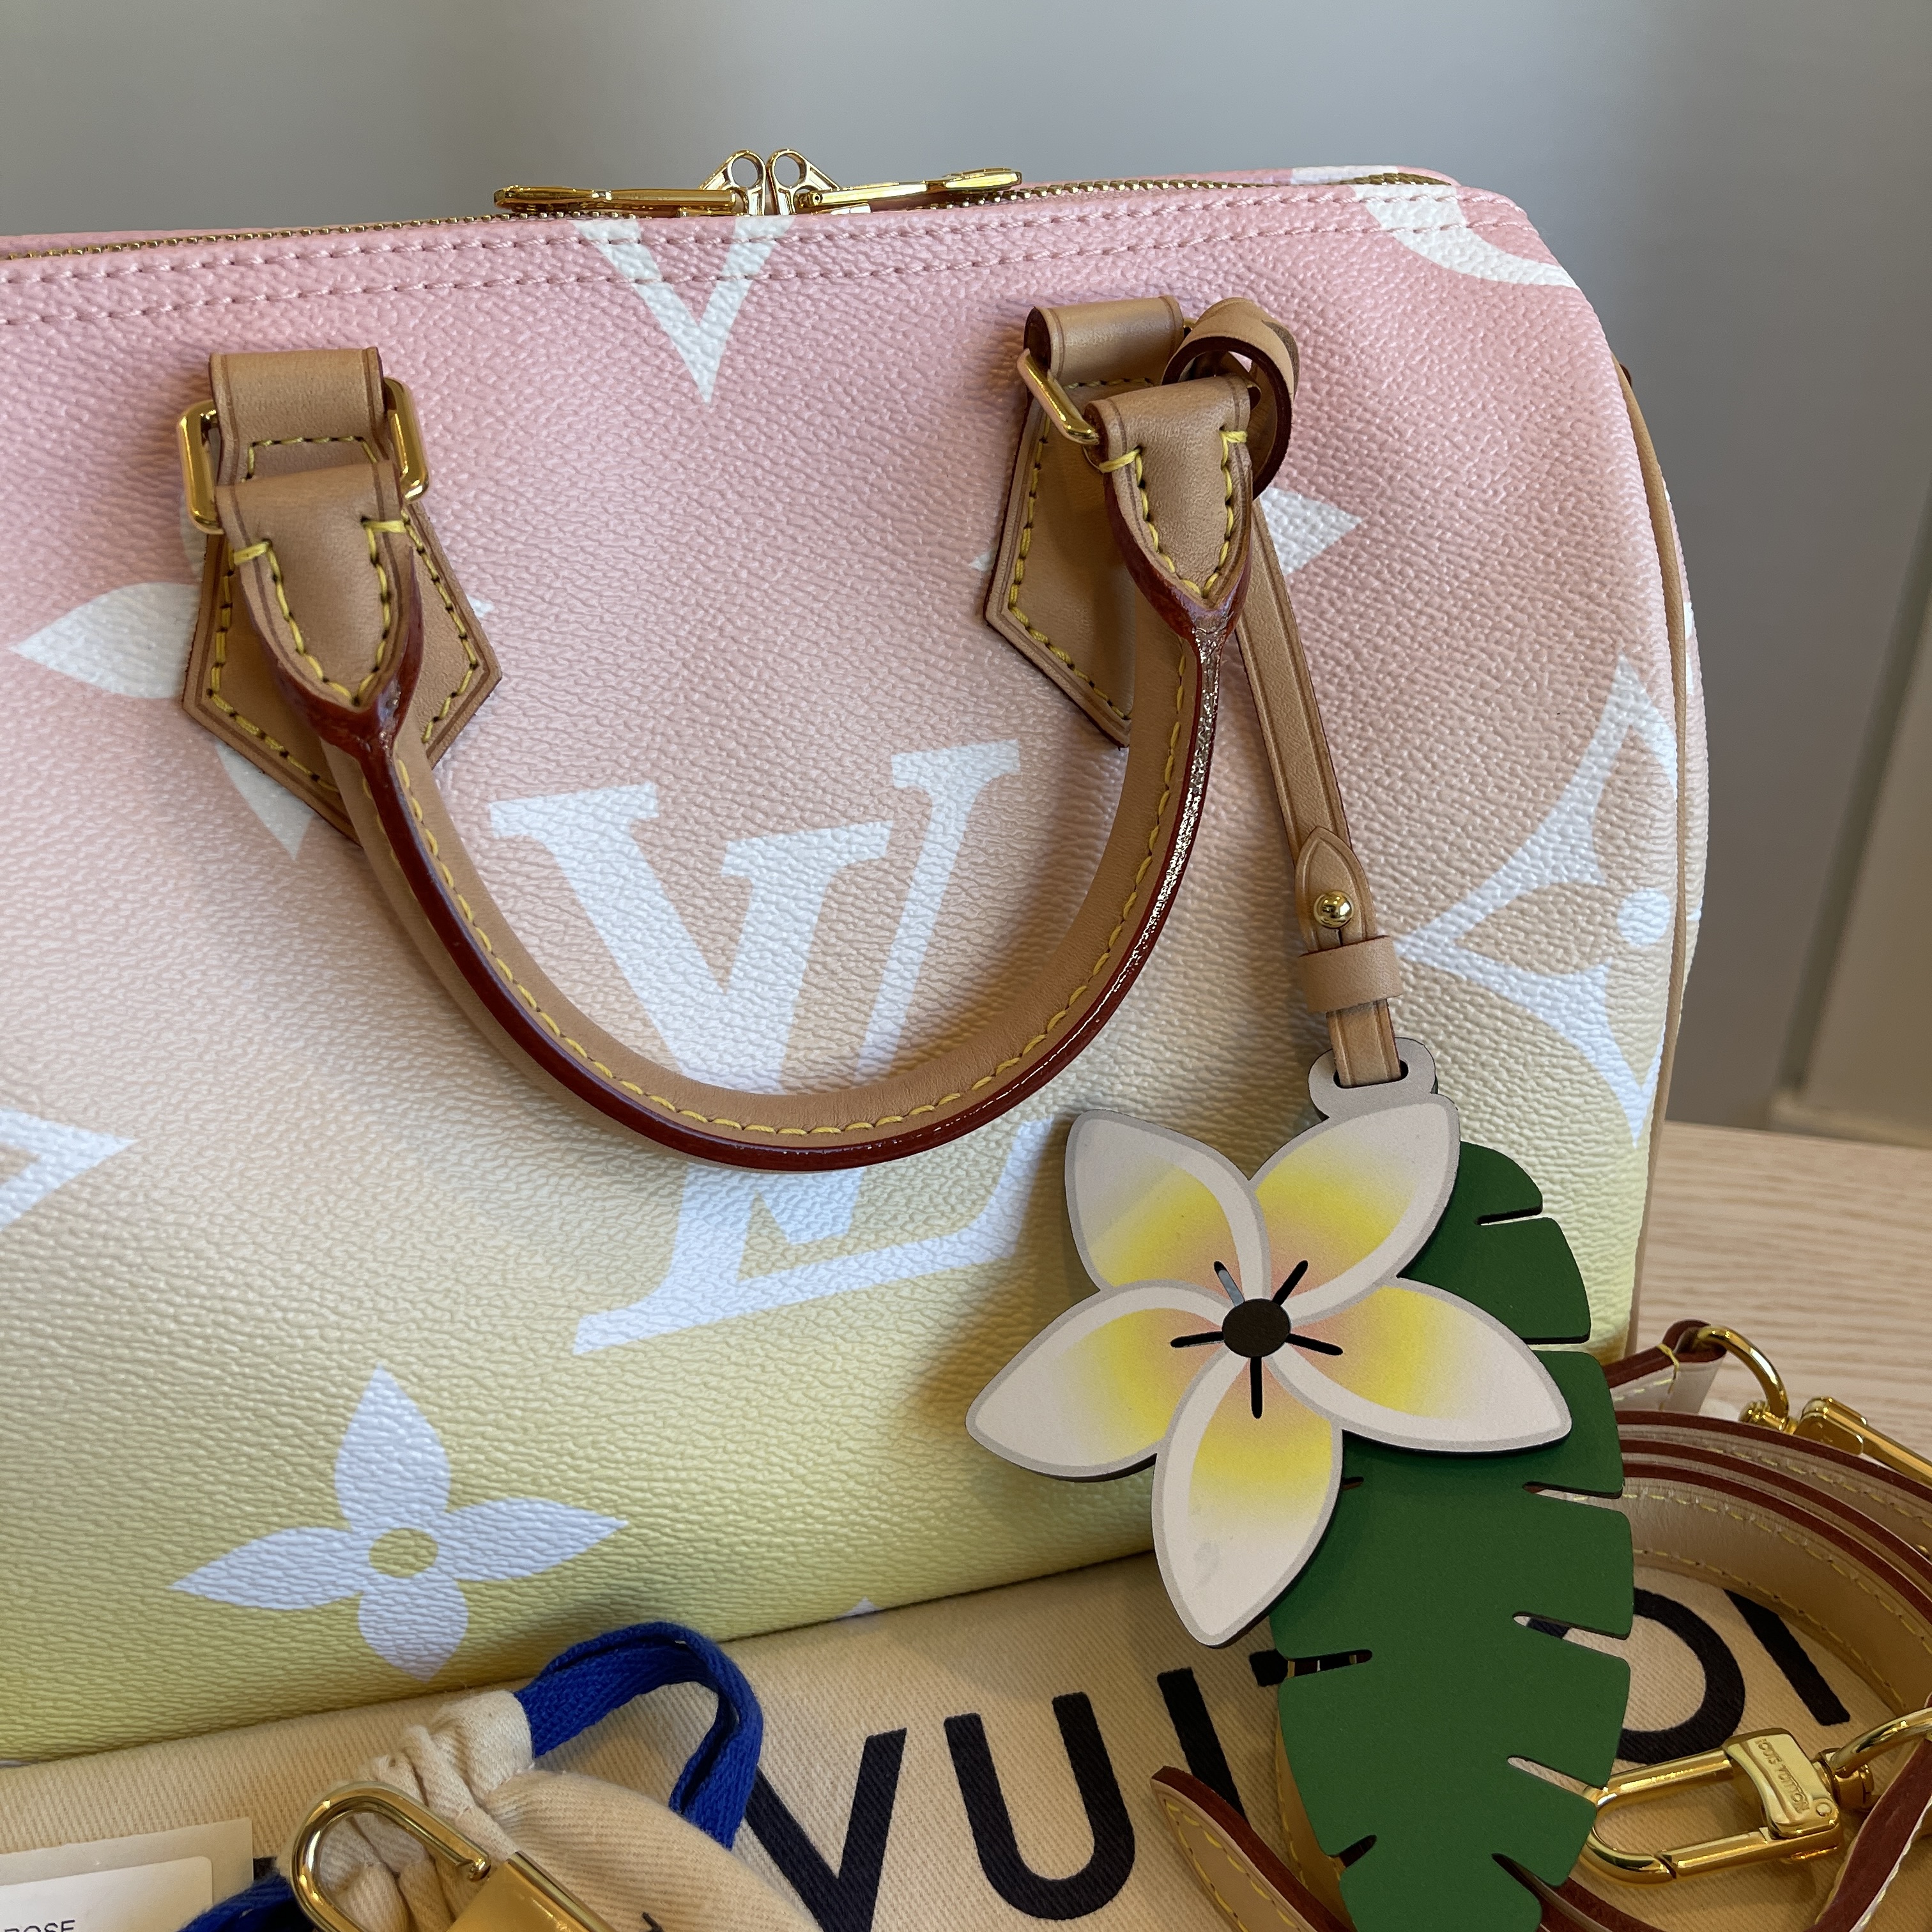 Louis Vuitton Giant Monogram Canvas By The Pool Speedy Bandouliere